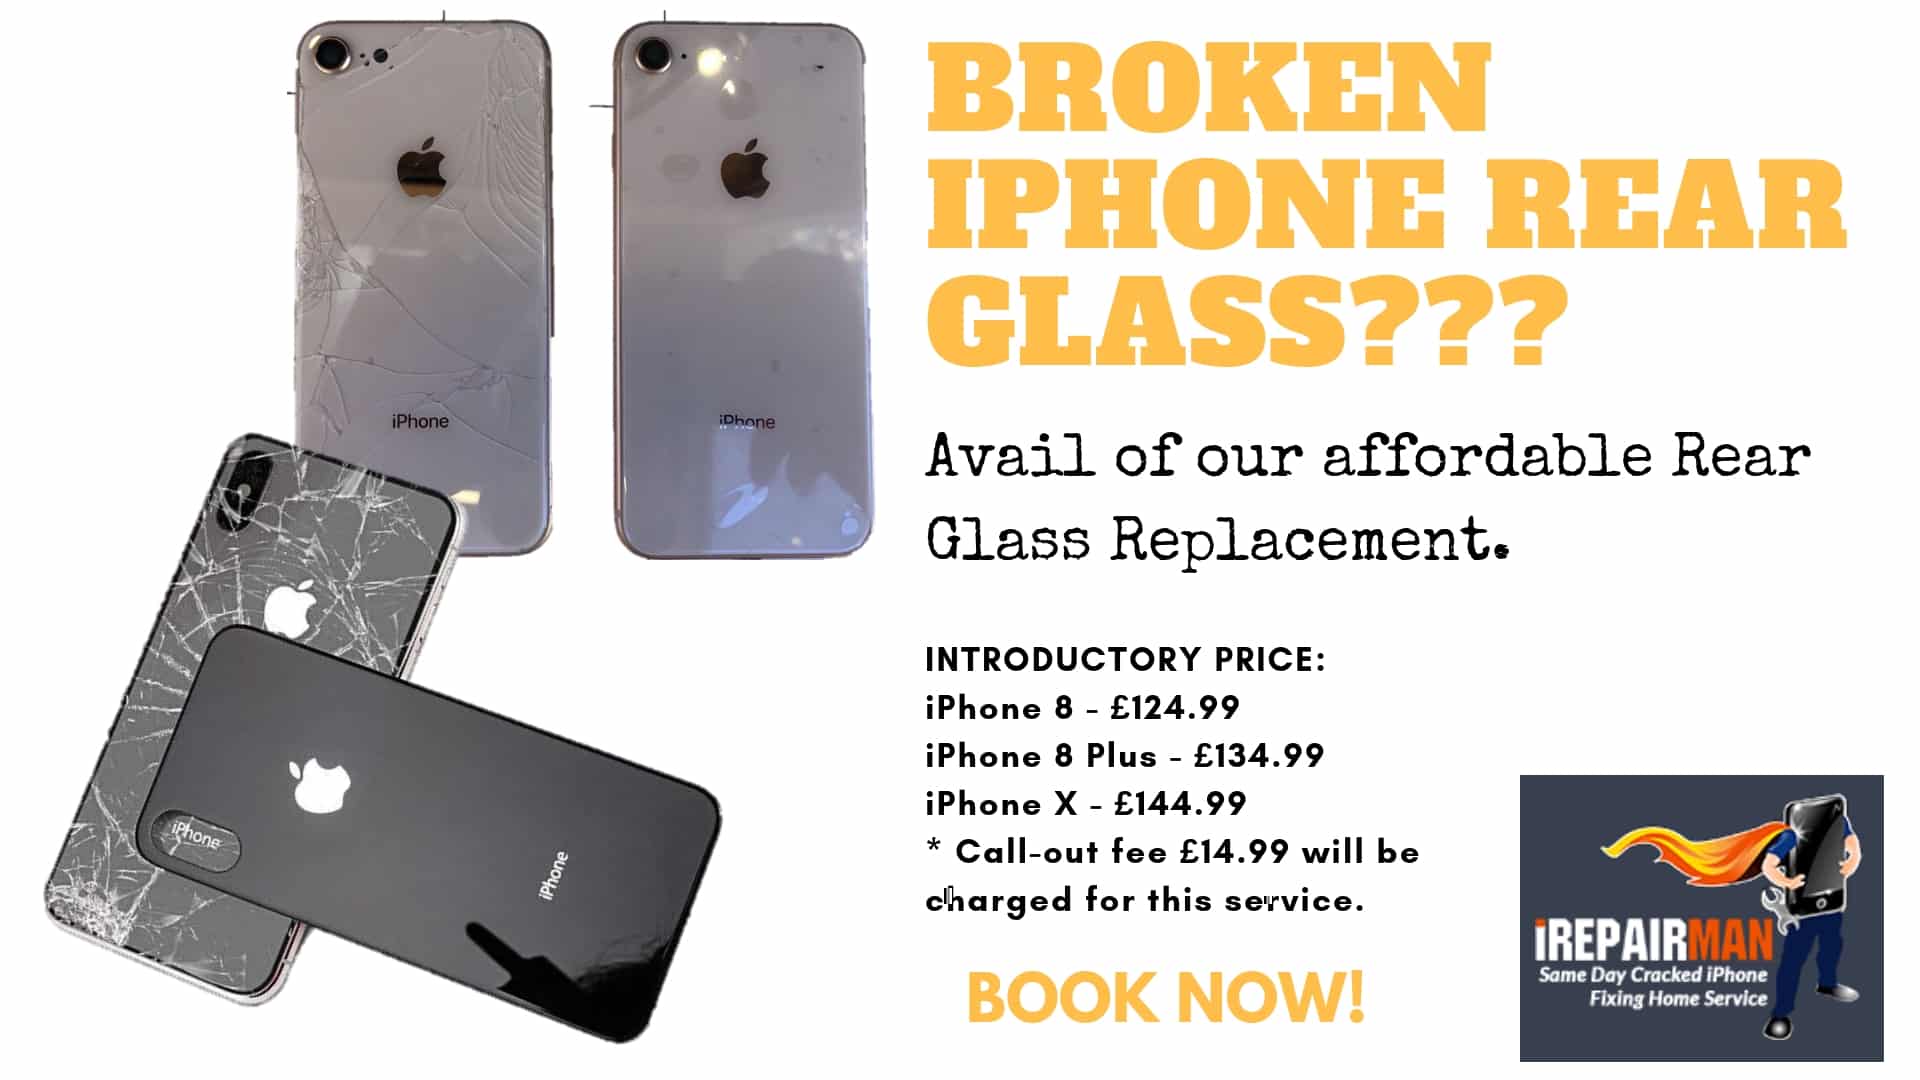 Fastest mail-in-phone-repairing service in London